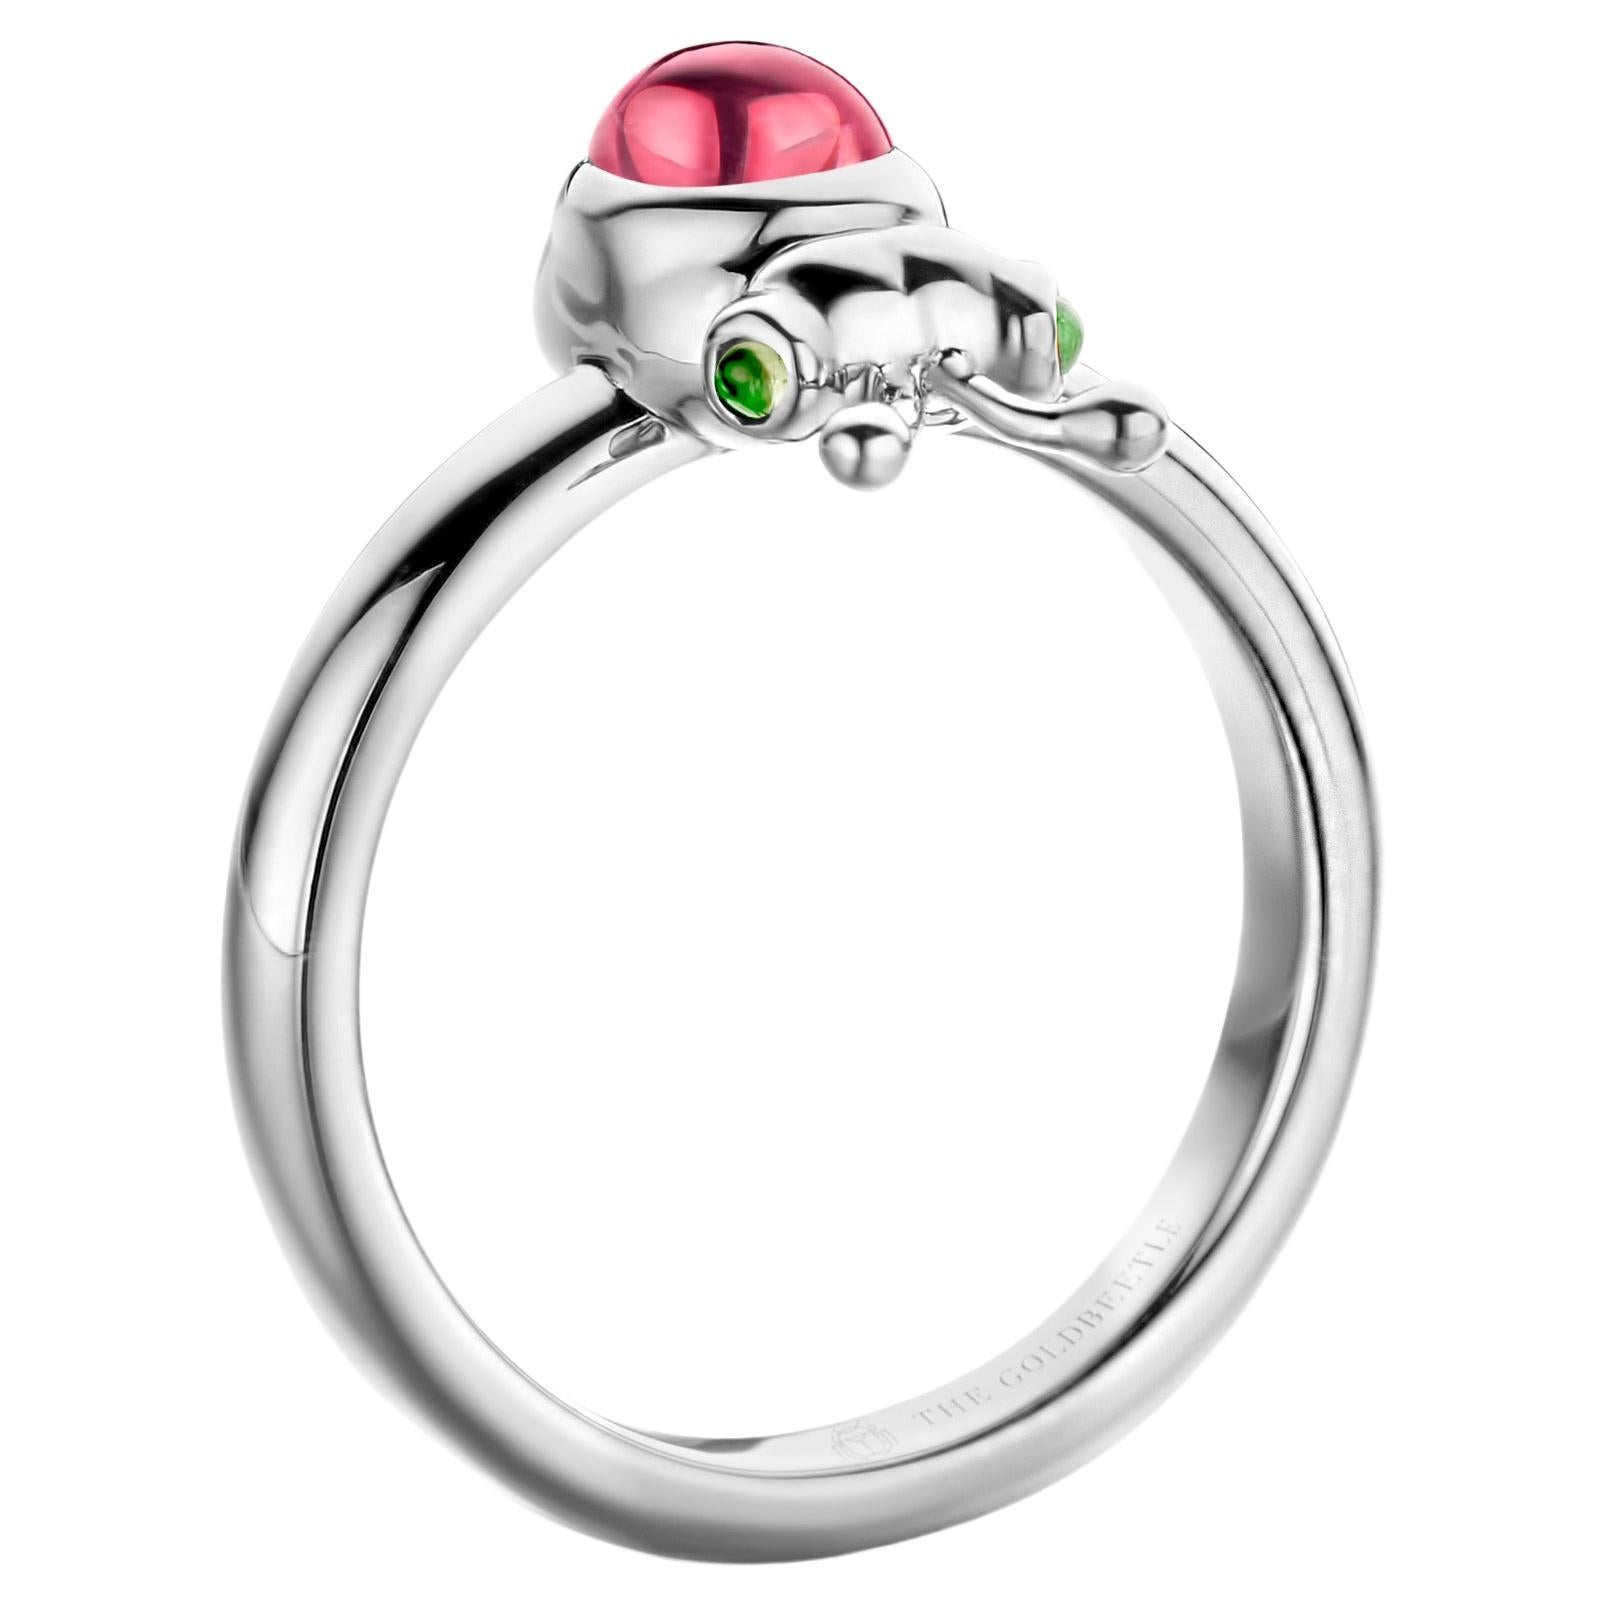 18 Karat white gold Lilou ring set with one natural pear-shaped cabochon Pink Tourmaline and two natural tsavorites in round cabochon cut.
